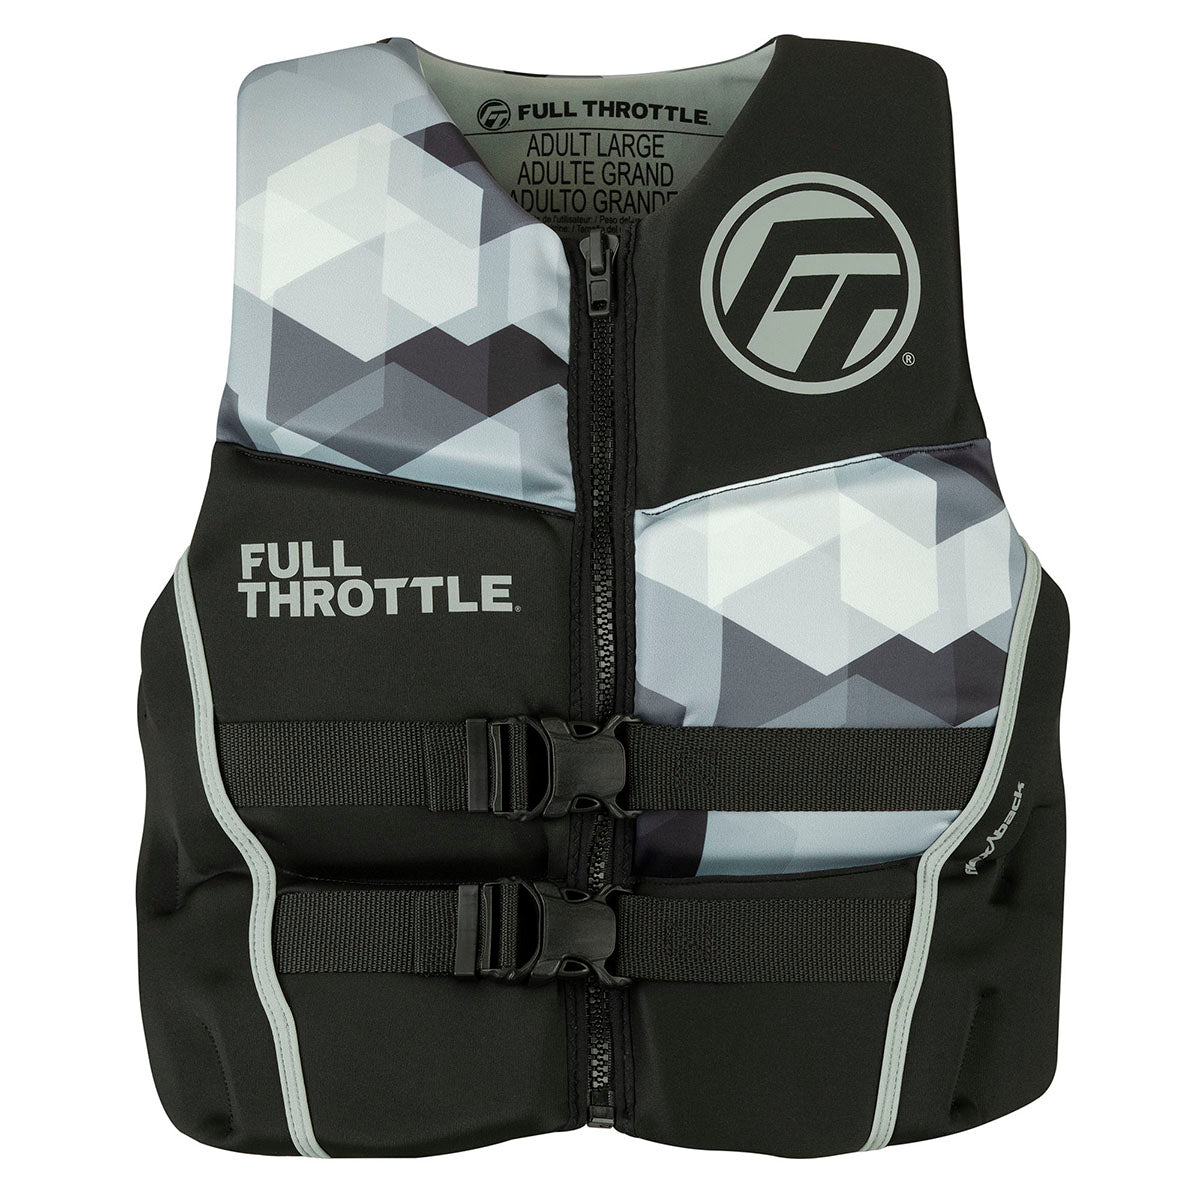 BULLET PROOF JACKET-VESTS FOR PERSONAL SAFETY : Amazon.in: Industrial &  Scientific